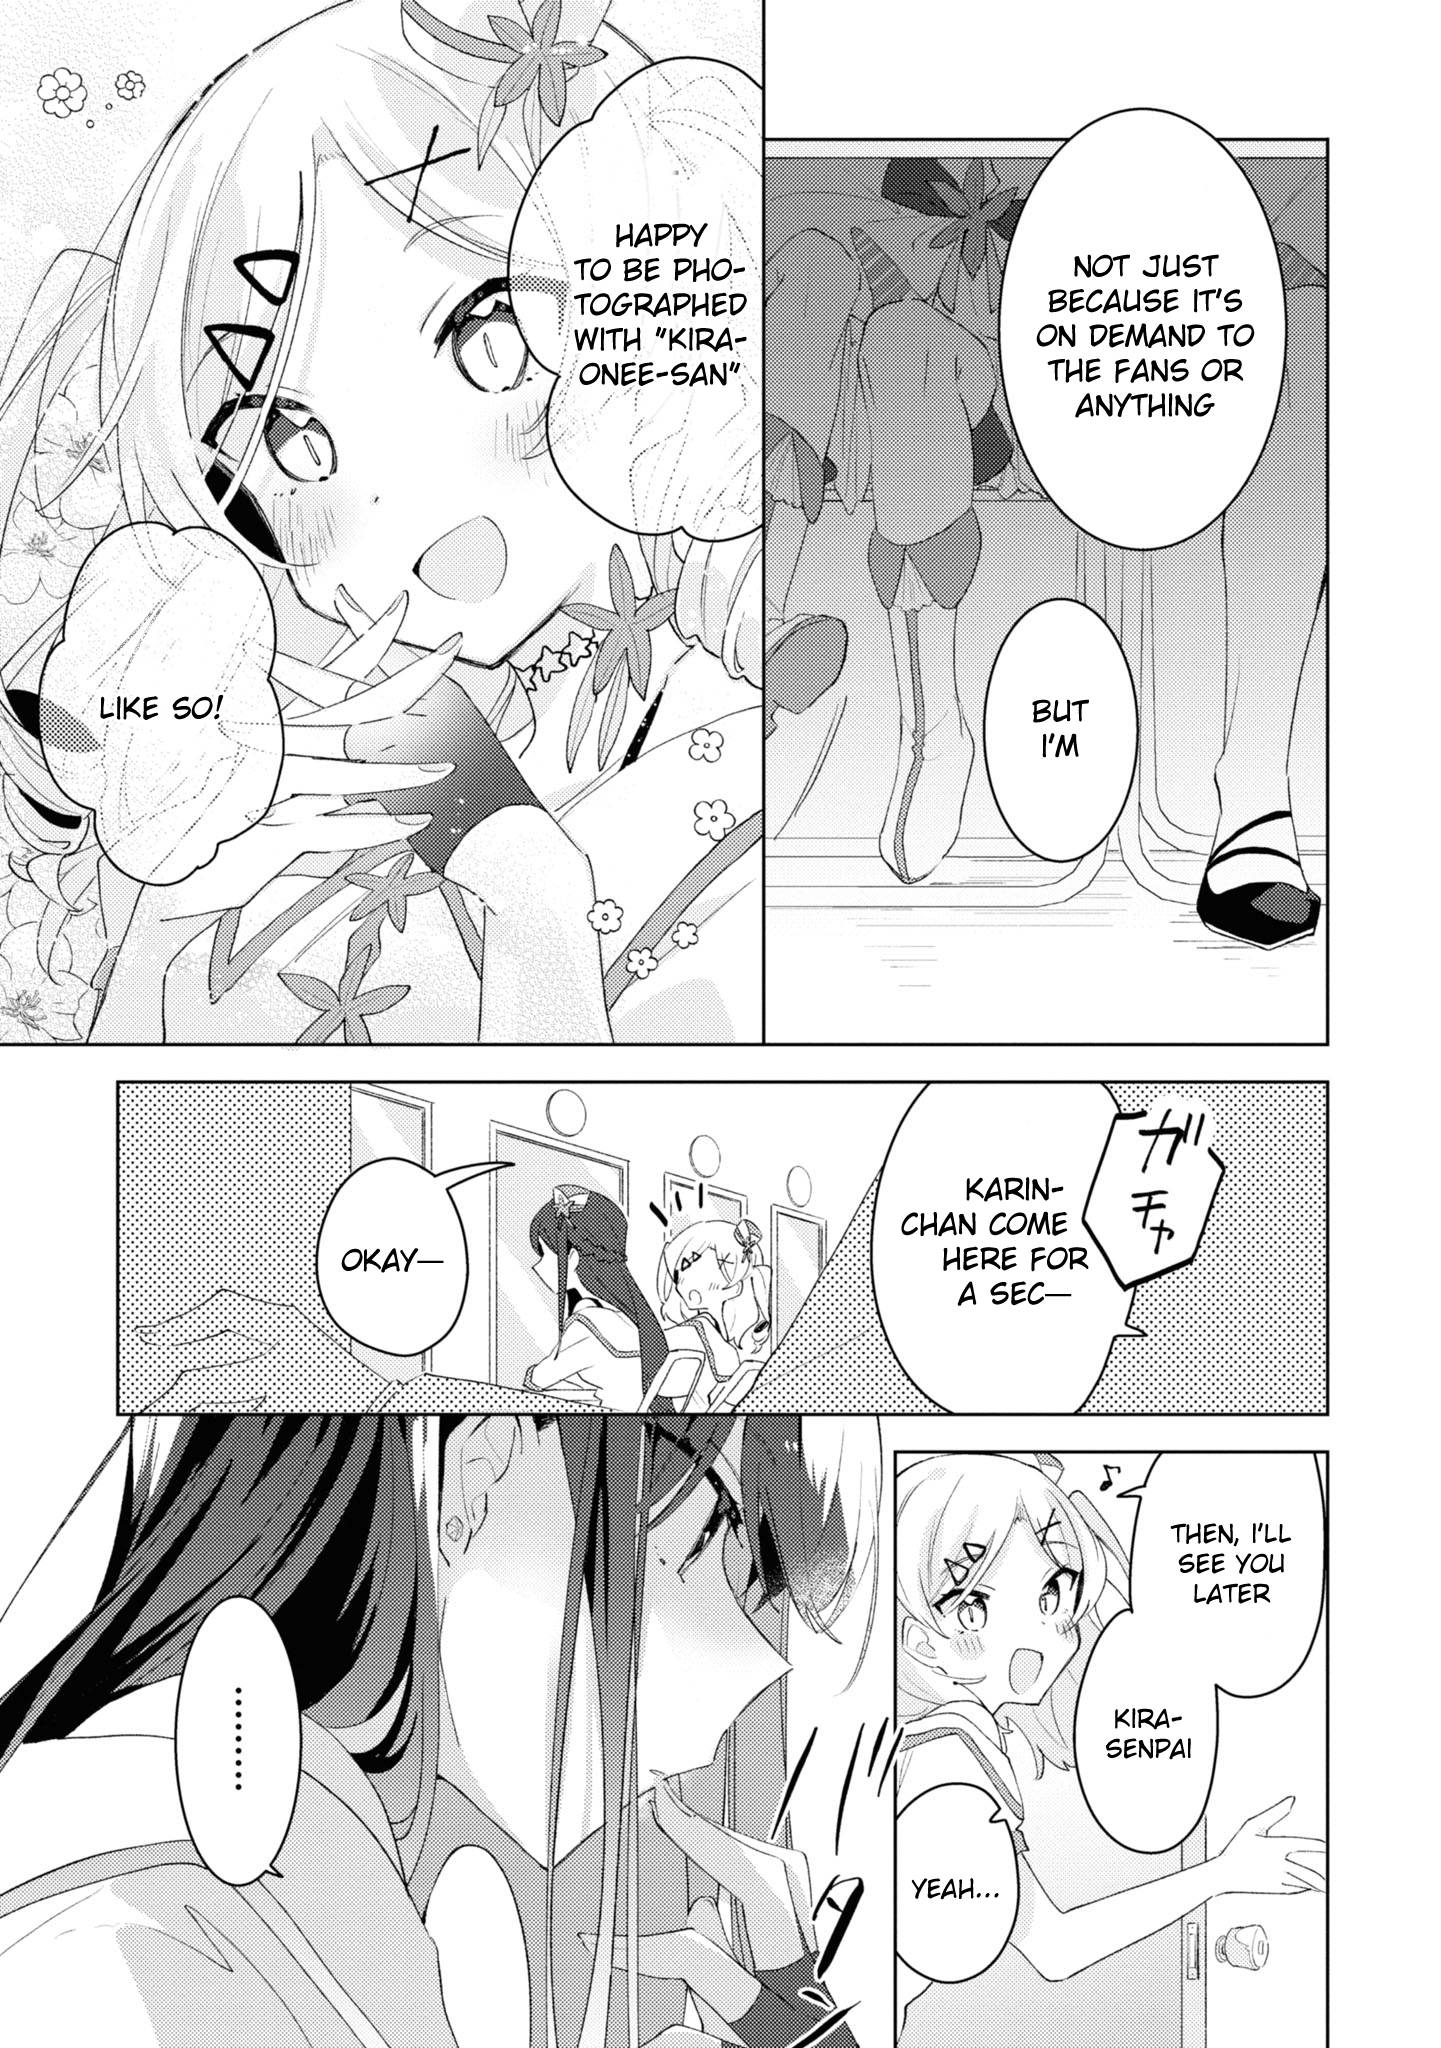 Insecure Herami Sisters - chapter 3 - #3